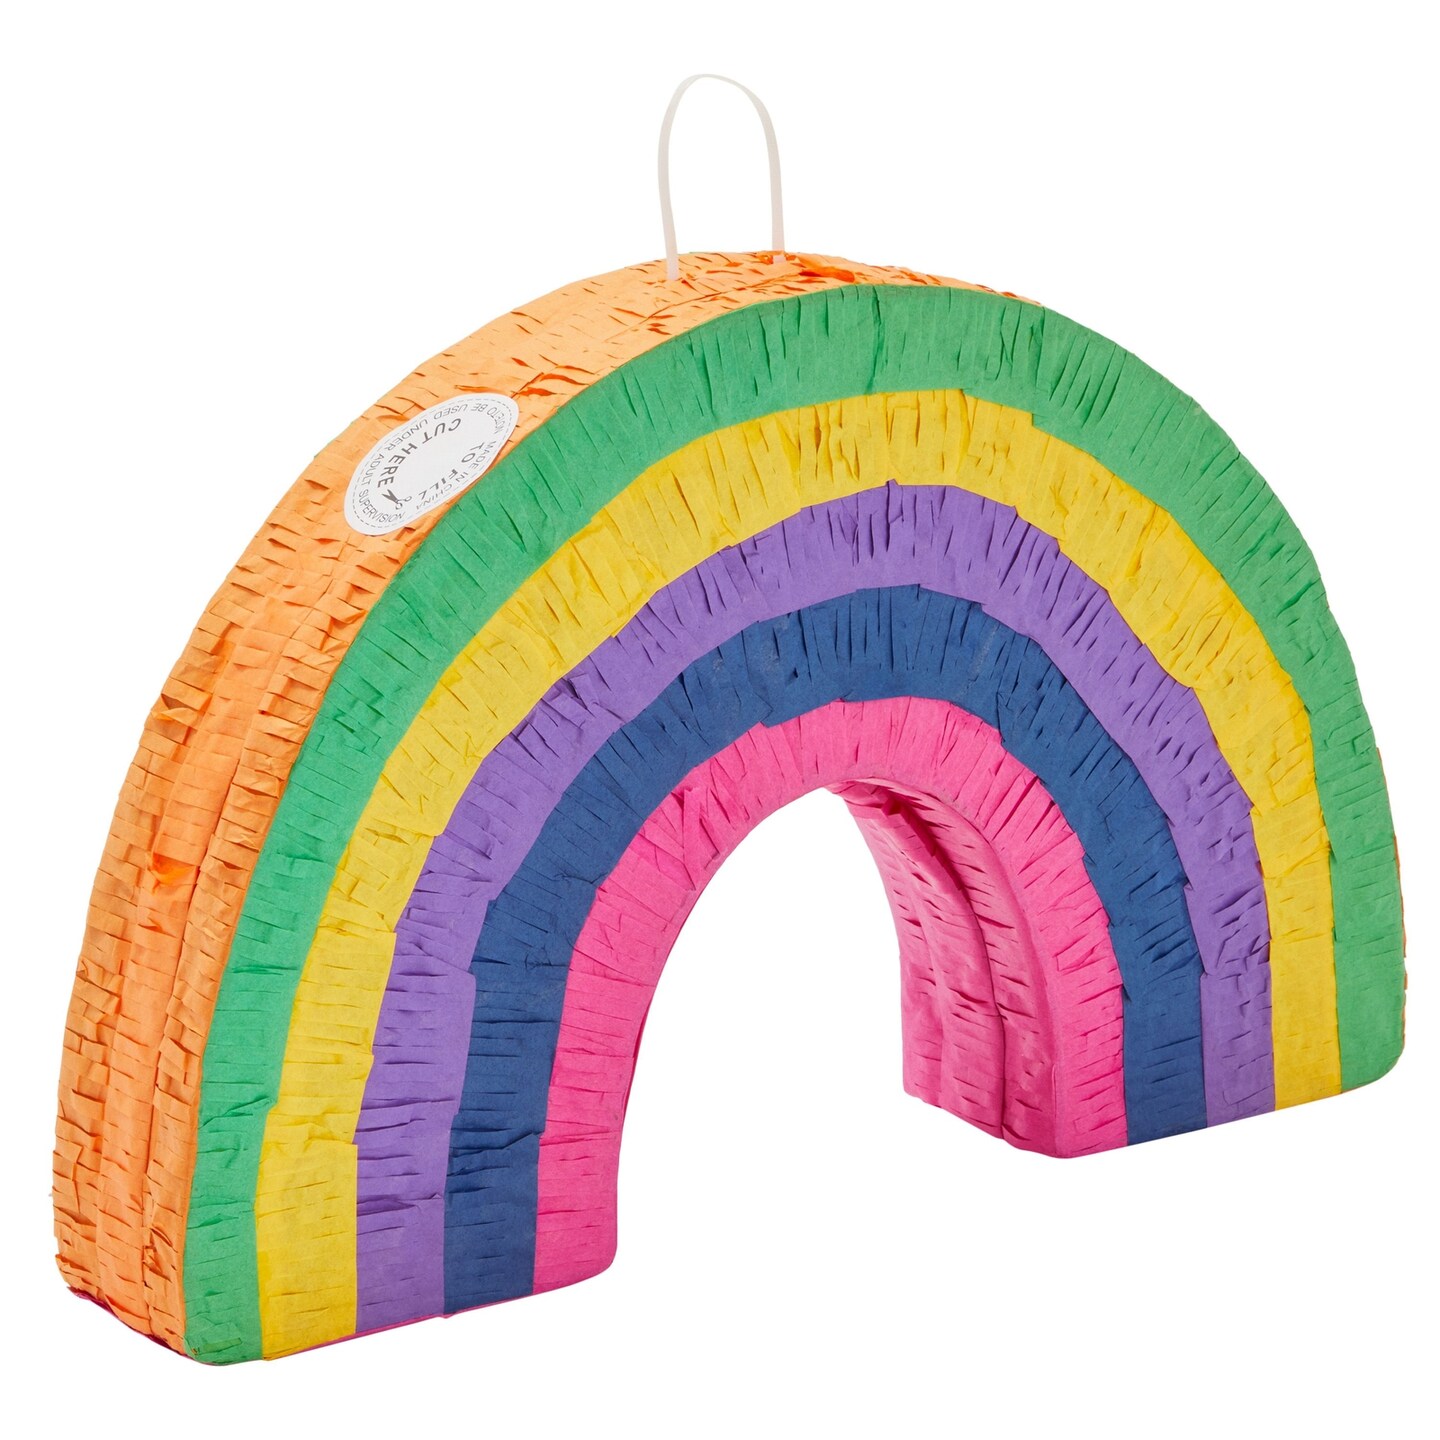 Rainbow Pinata for Pride, Baby Shower, Kids Birthday Party Decorations, (Small, 17x10x3 Inches)